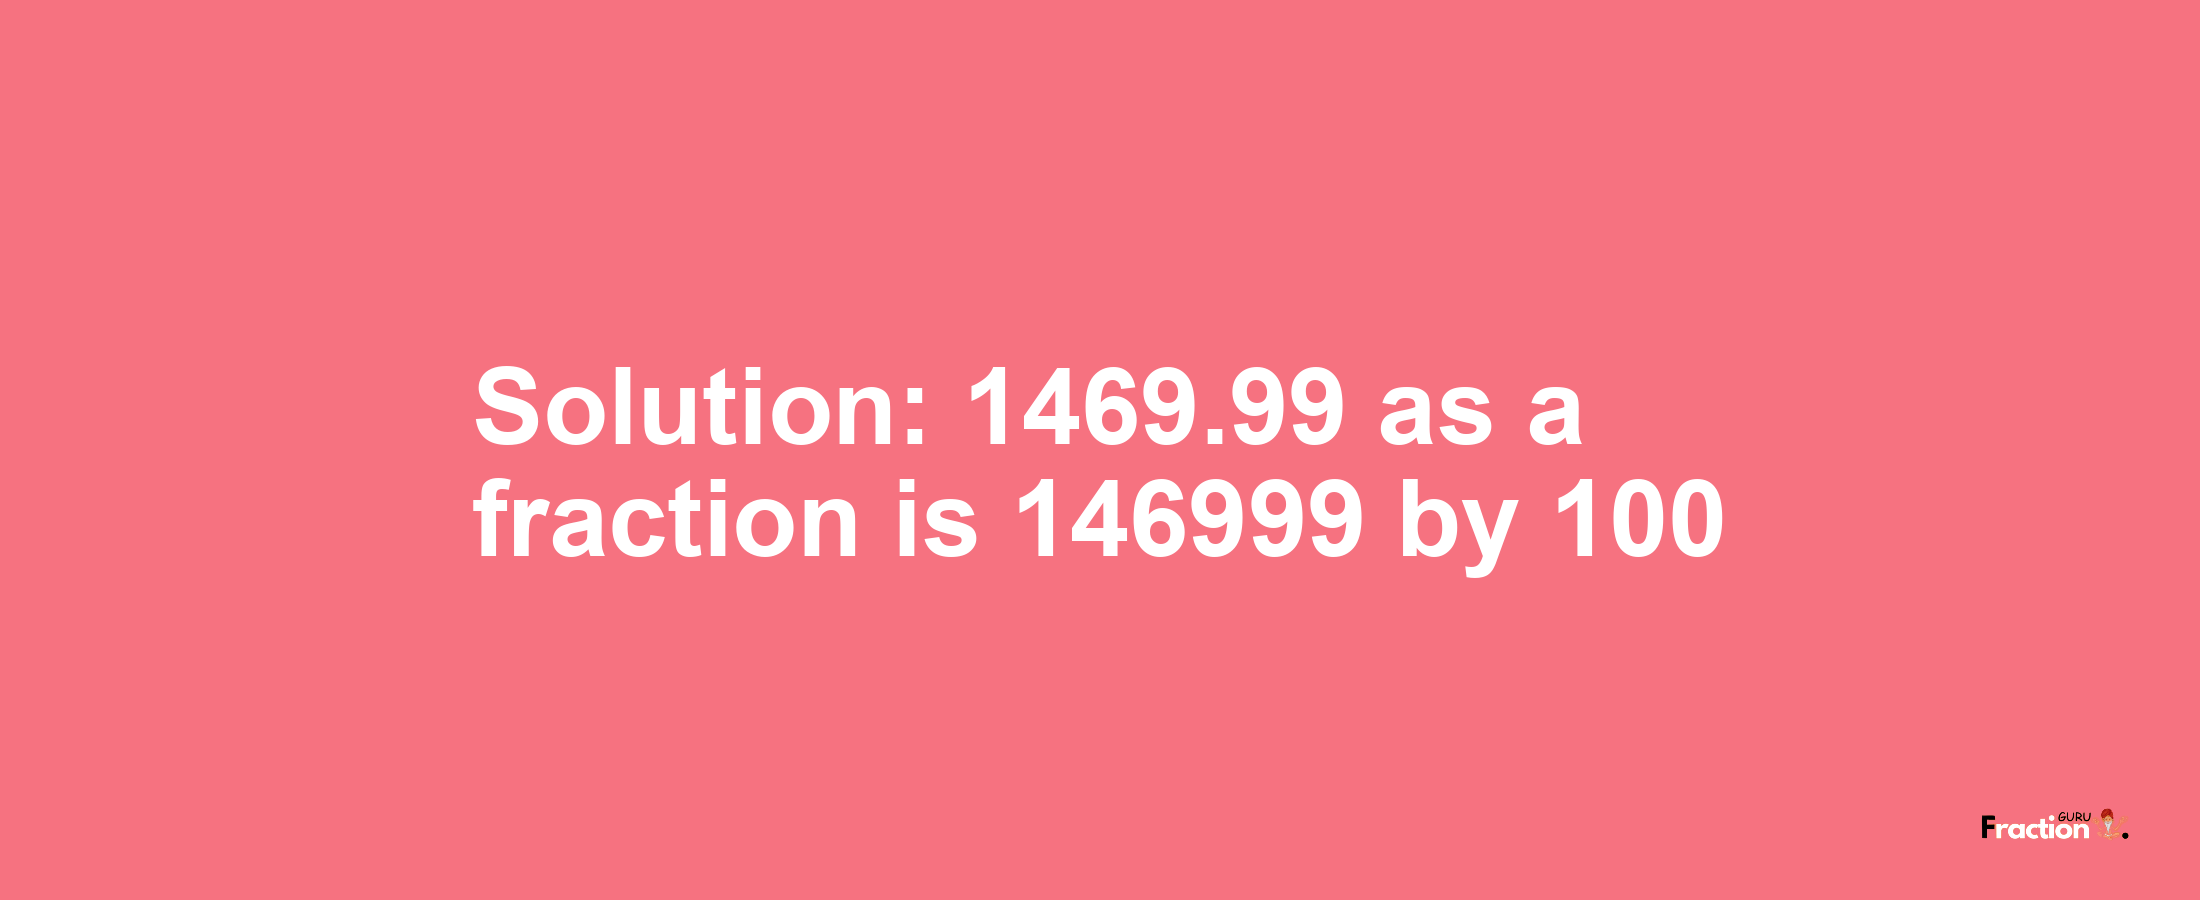 Solution:1469.99 as a fraction is 146999/100